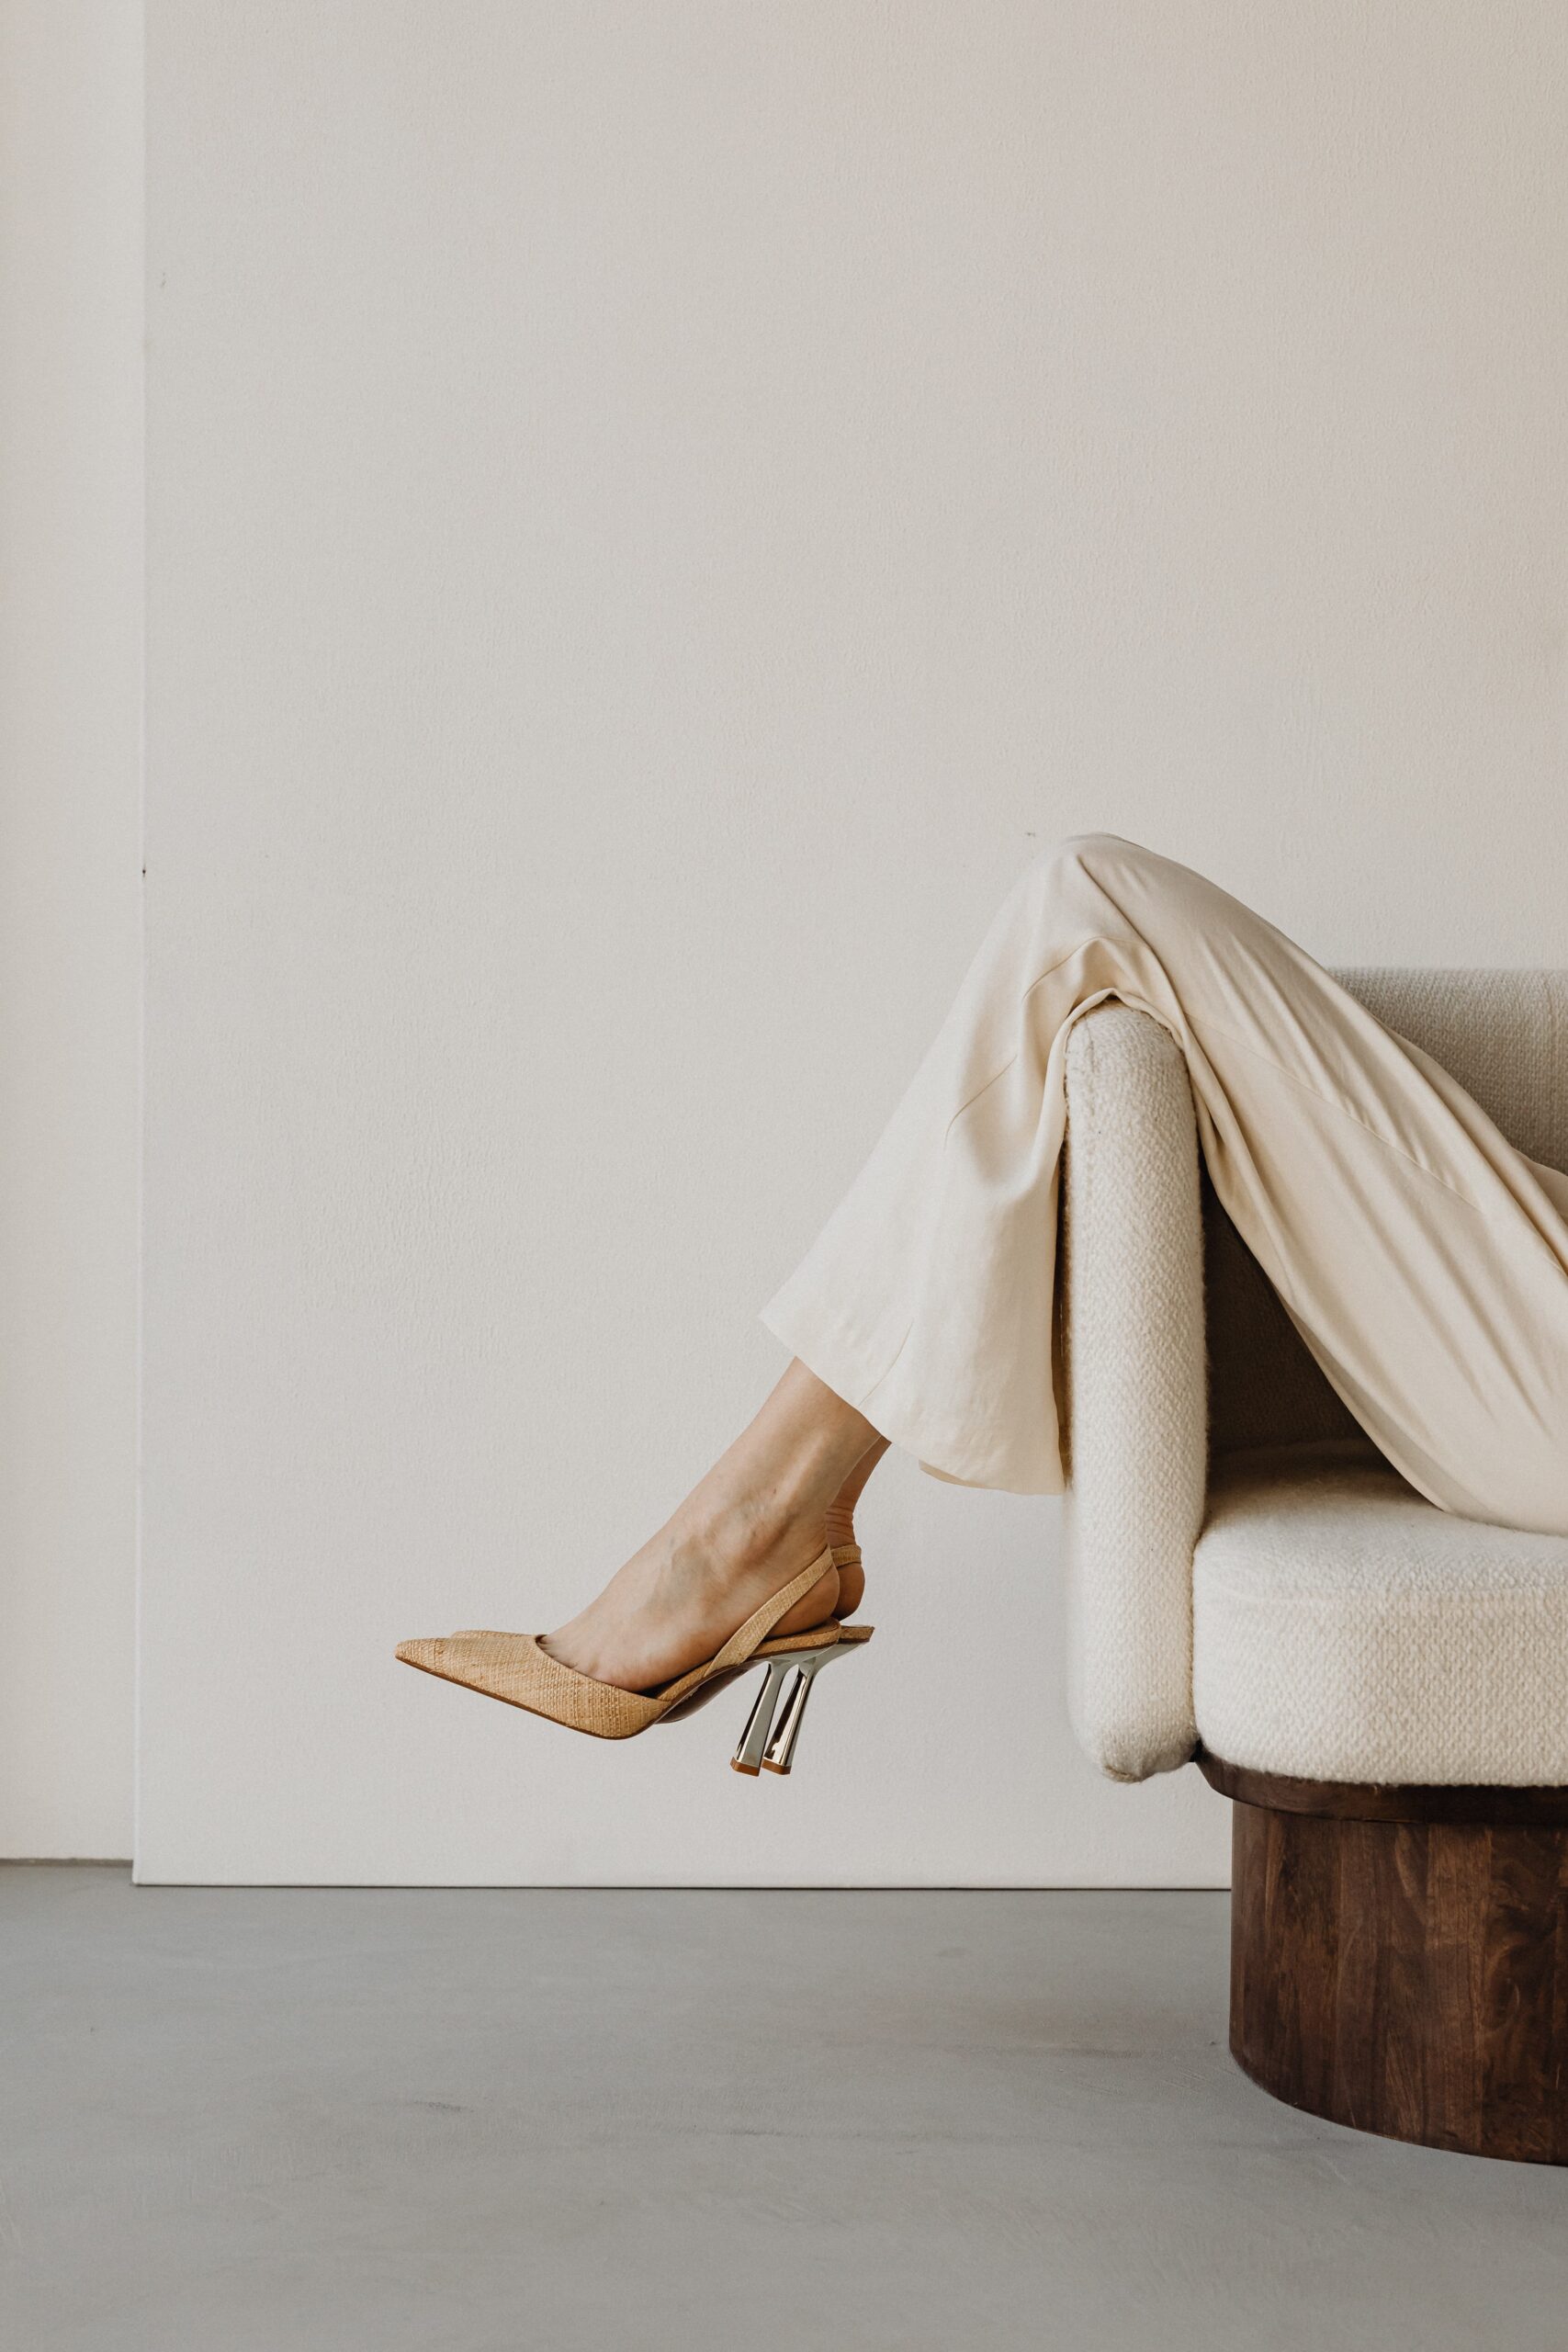 brand photography of woman in high heels sitting in a chair